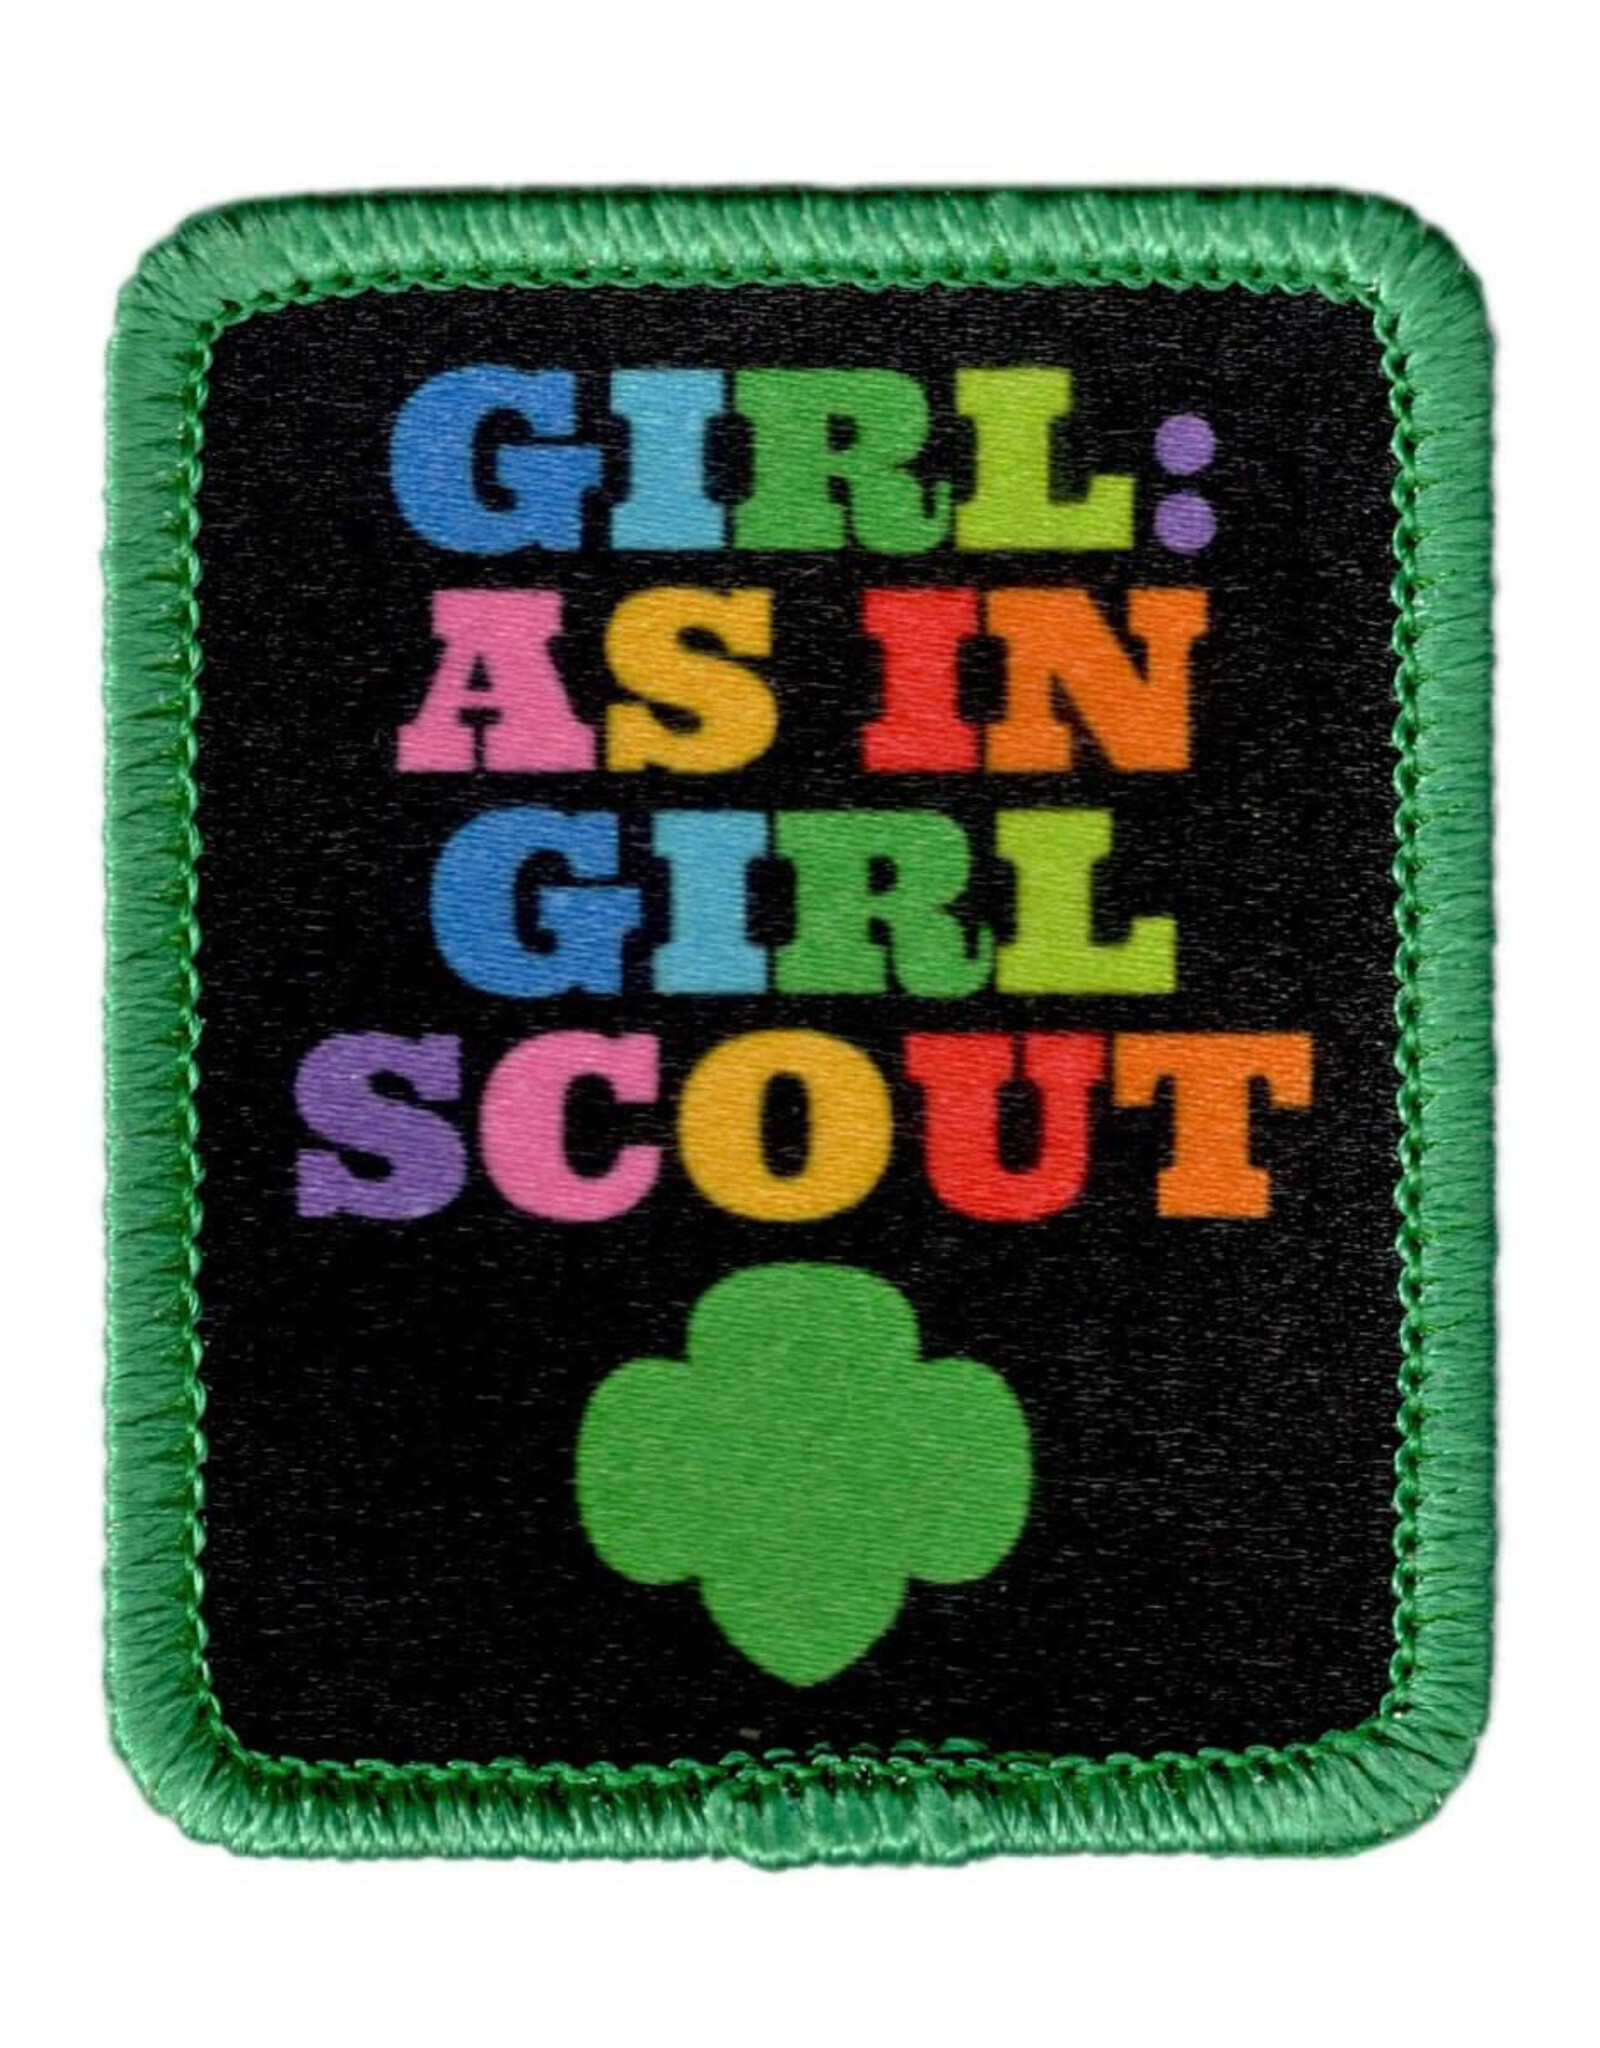 Girl As in Girl Scout Patch